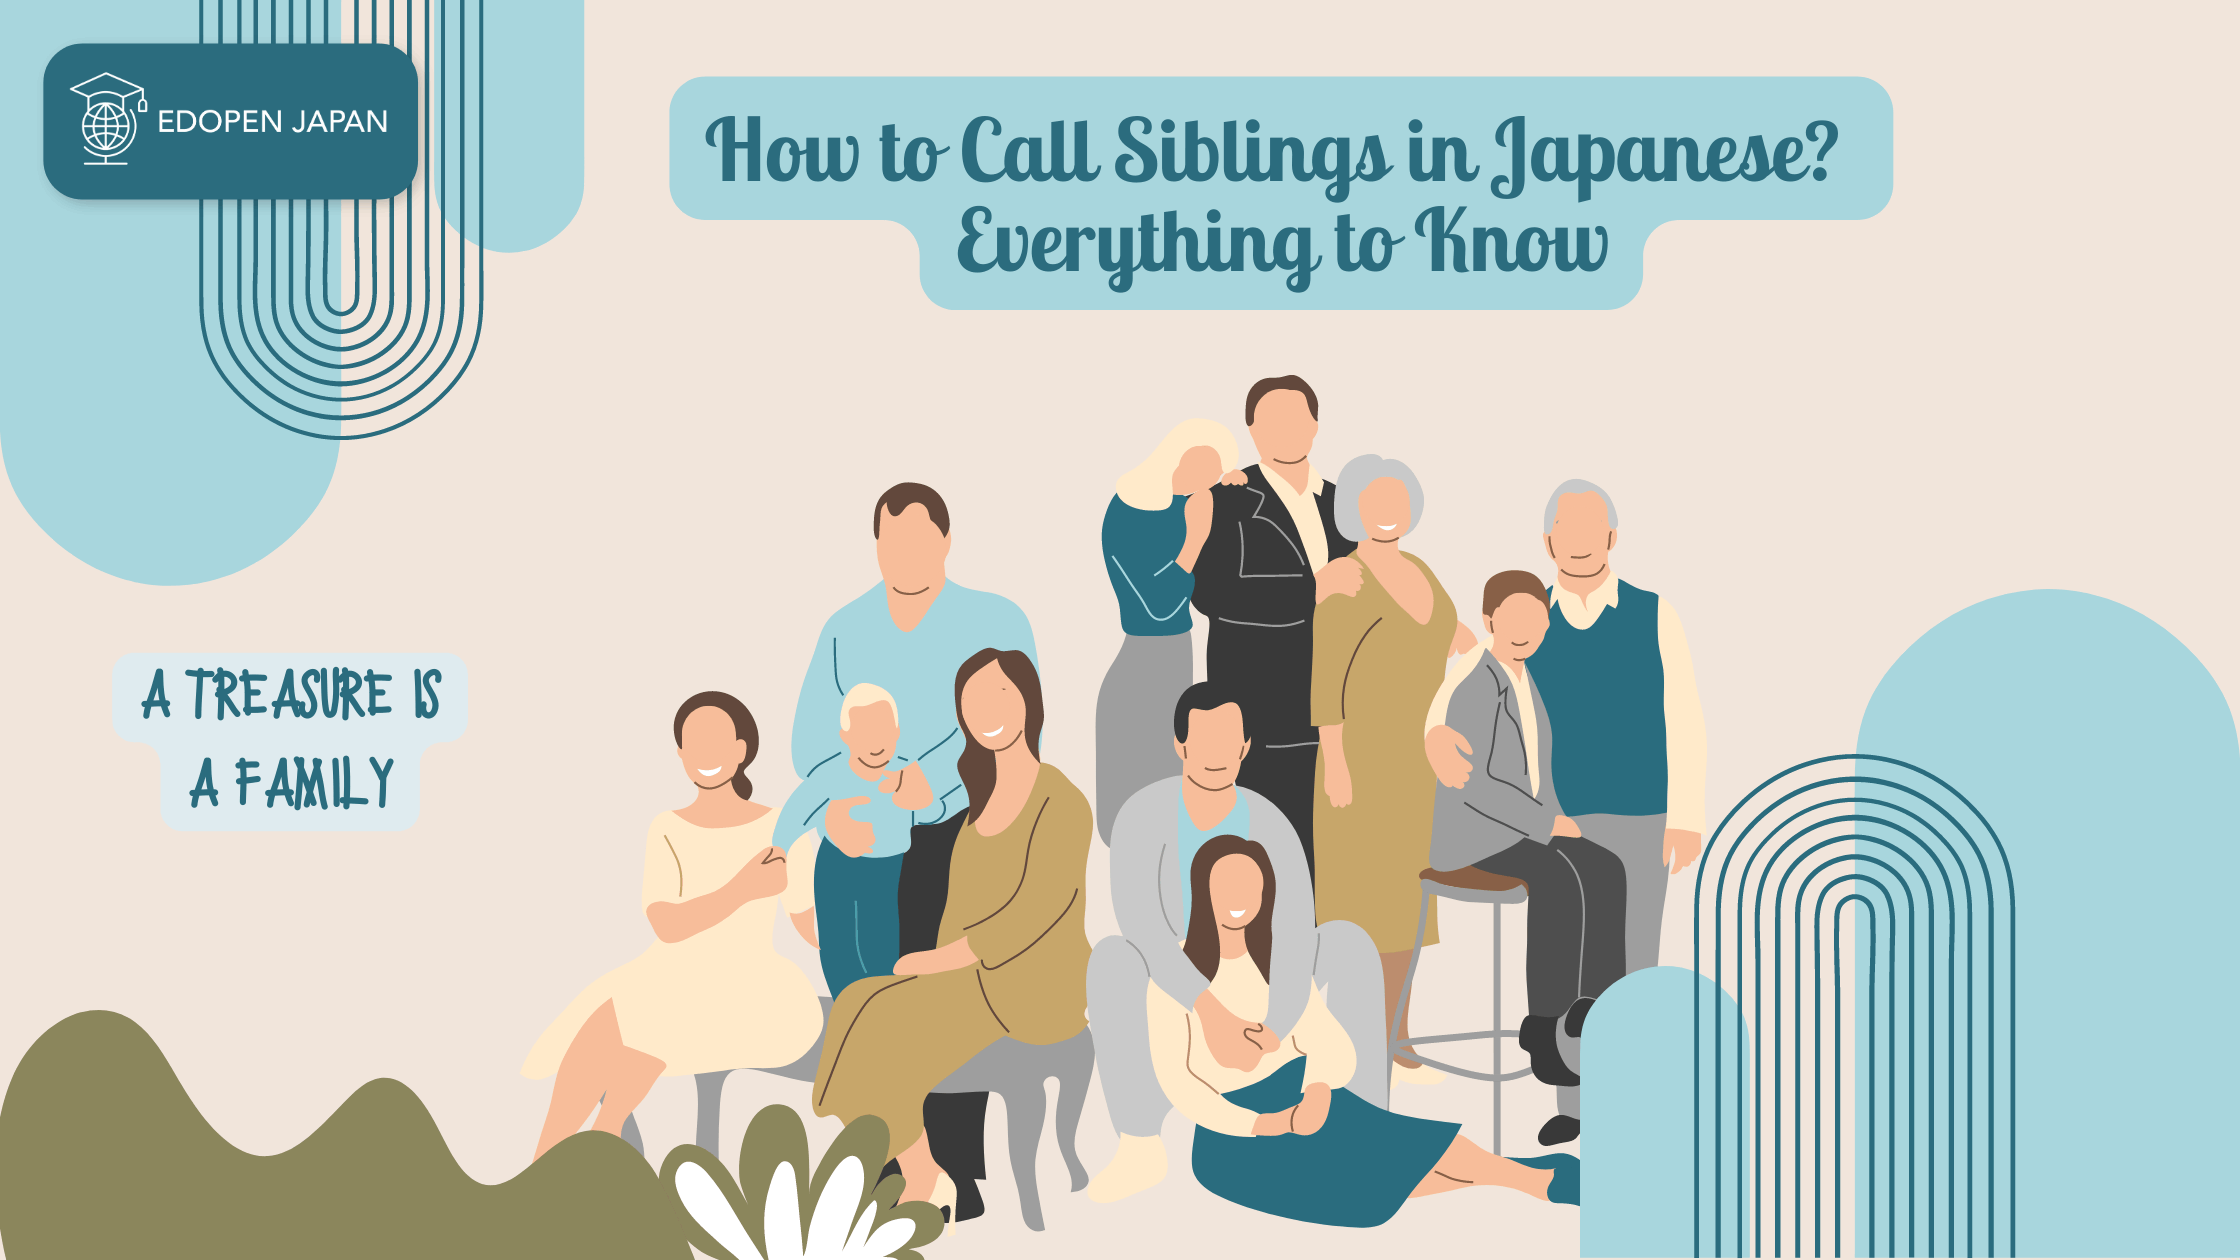 How to Call Siblings in Japanese? Everything to Know - EDOPEN Japan